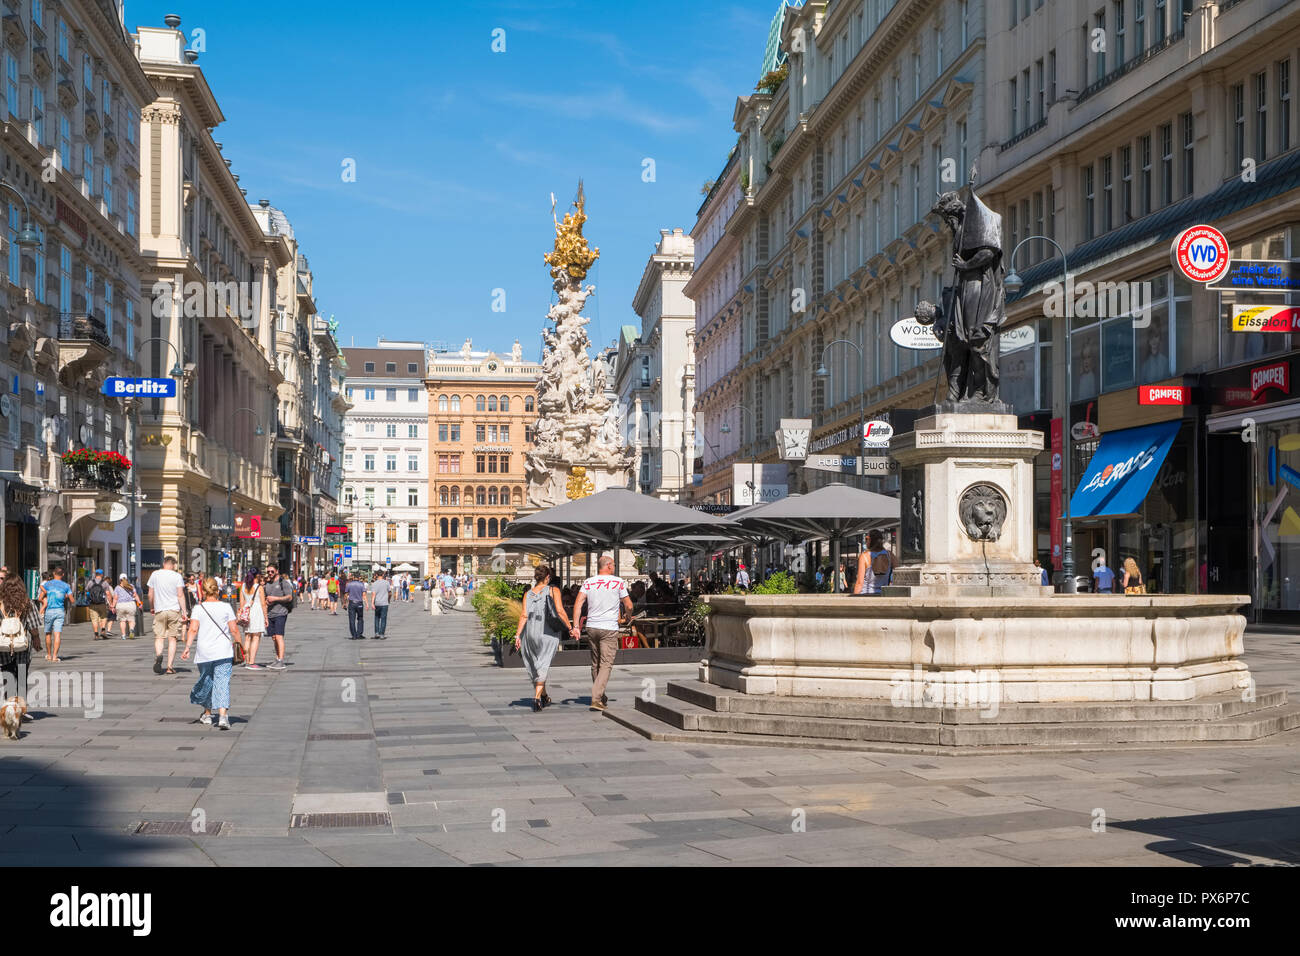 Street scene and the Pestsaule in Graben, a shopping street in central Vienna, Austria, Europe Stock Photo